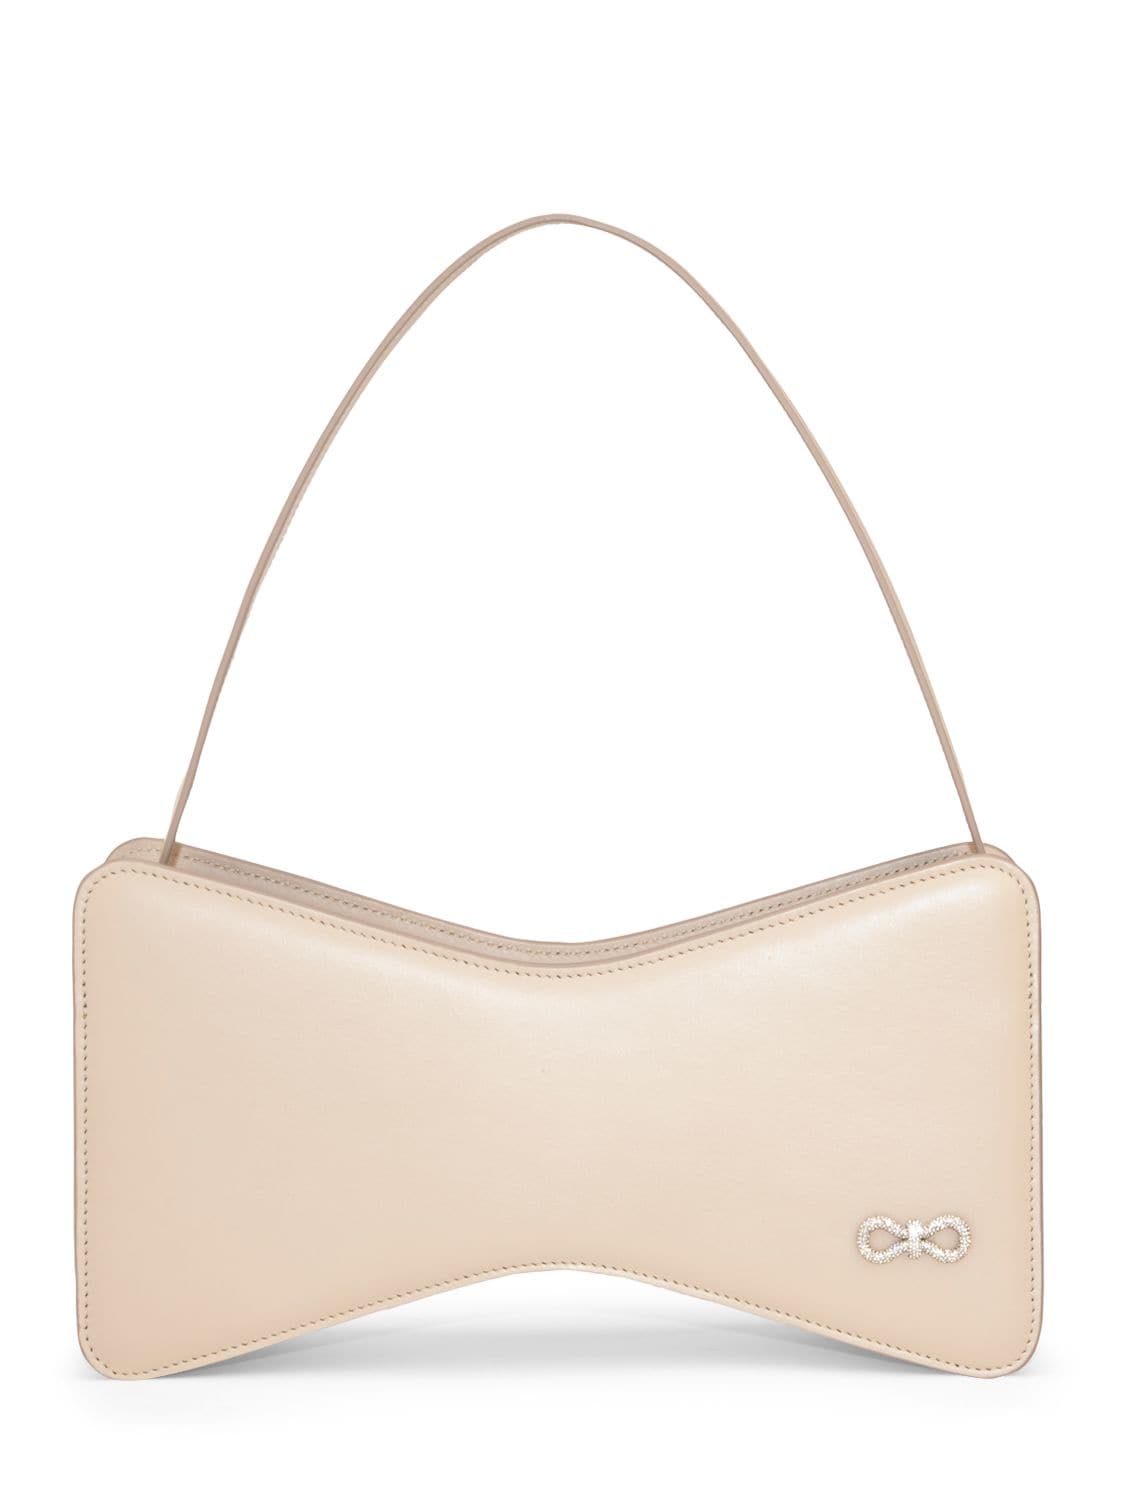 Mach & Mach Lg Bow Leather Baguette Top Handle Bag In Beige